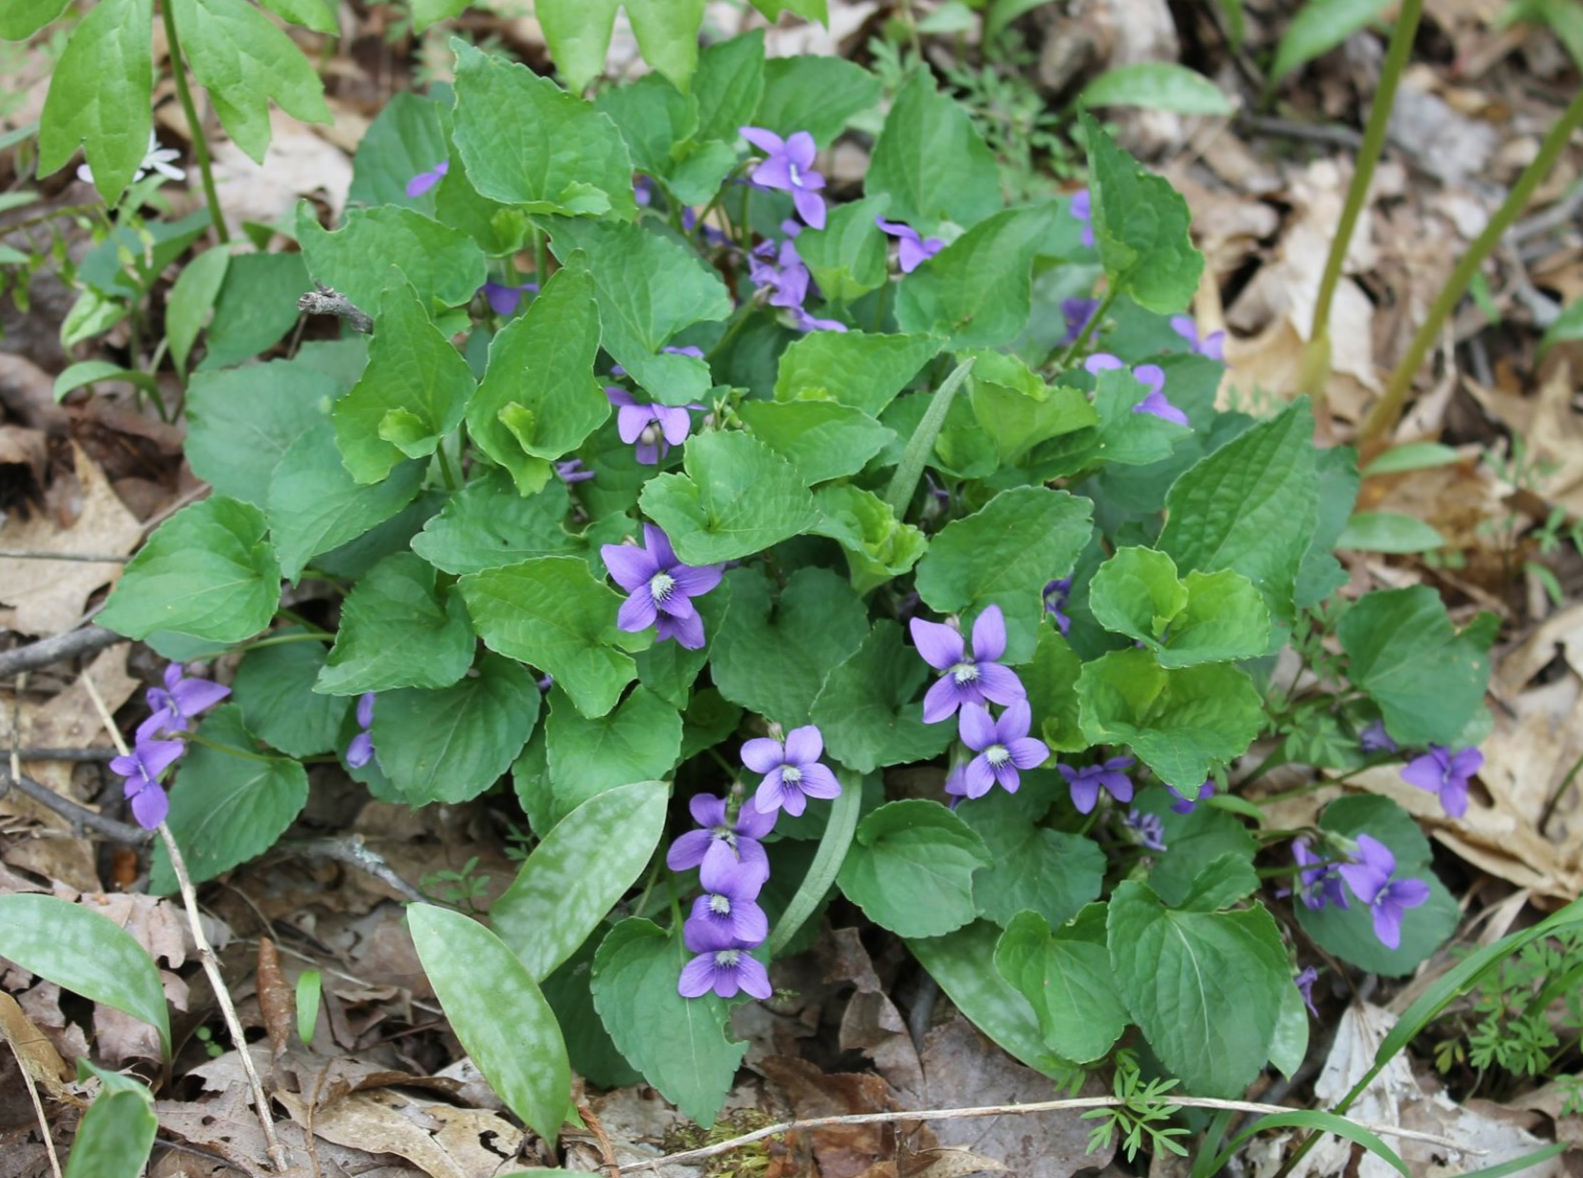 Common Violet flower at the Charlestown State Park